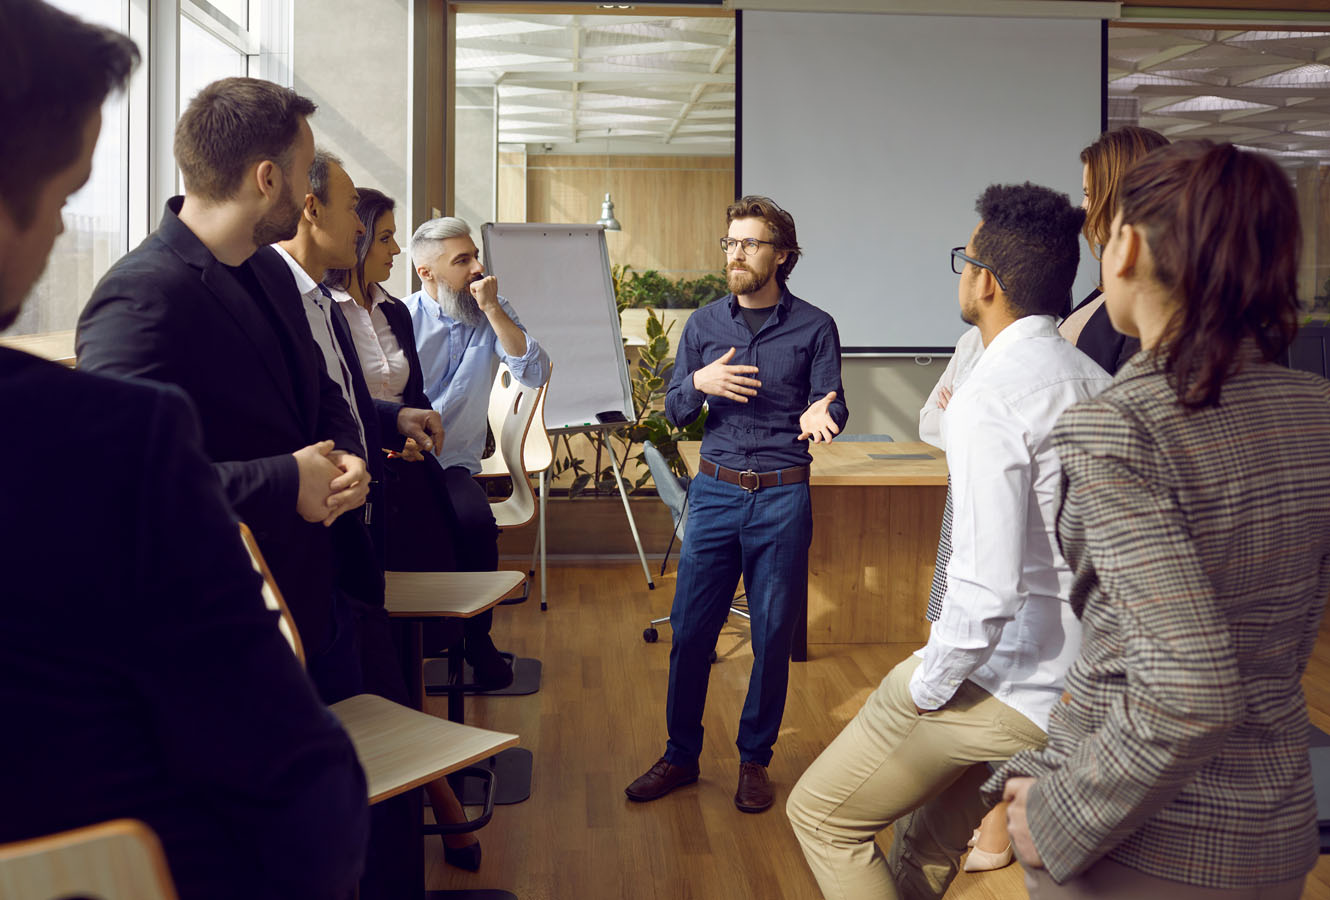 Serious young man business trainer talking to group of people in office standing around him and listening. Office staff, entrepreneurs on corporative training, team building seminar or master class.